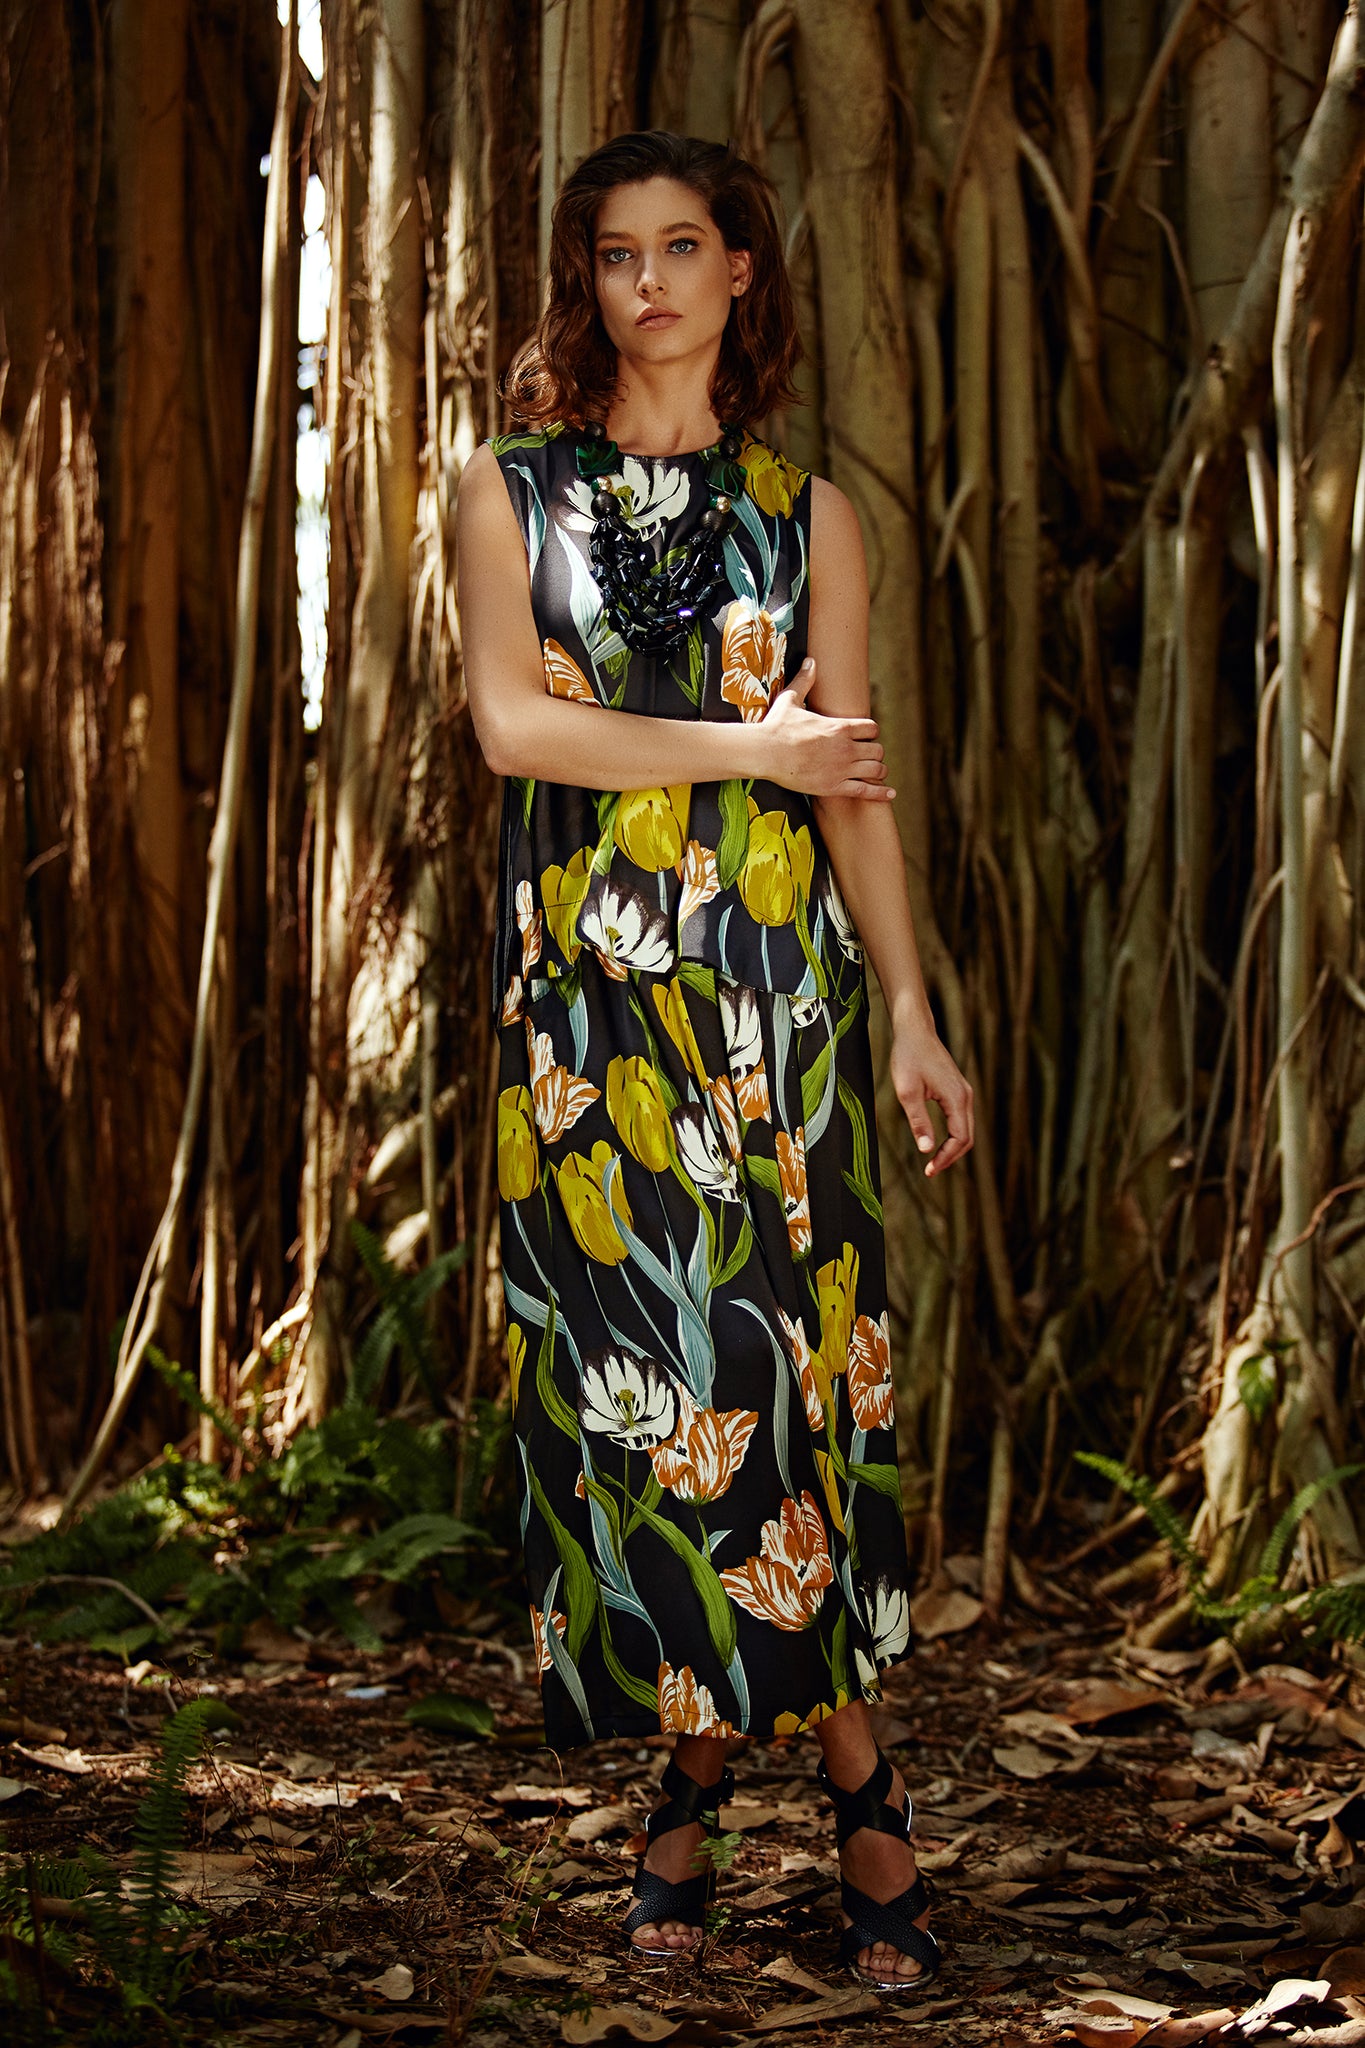 A HOT Vacation is near! Alembika's Resort Collection